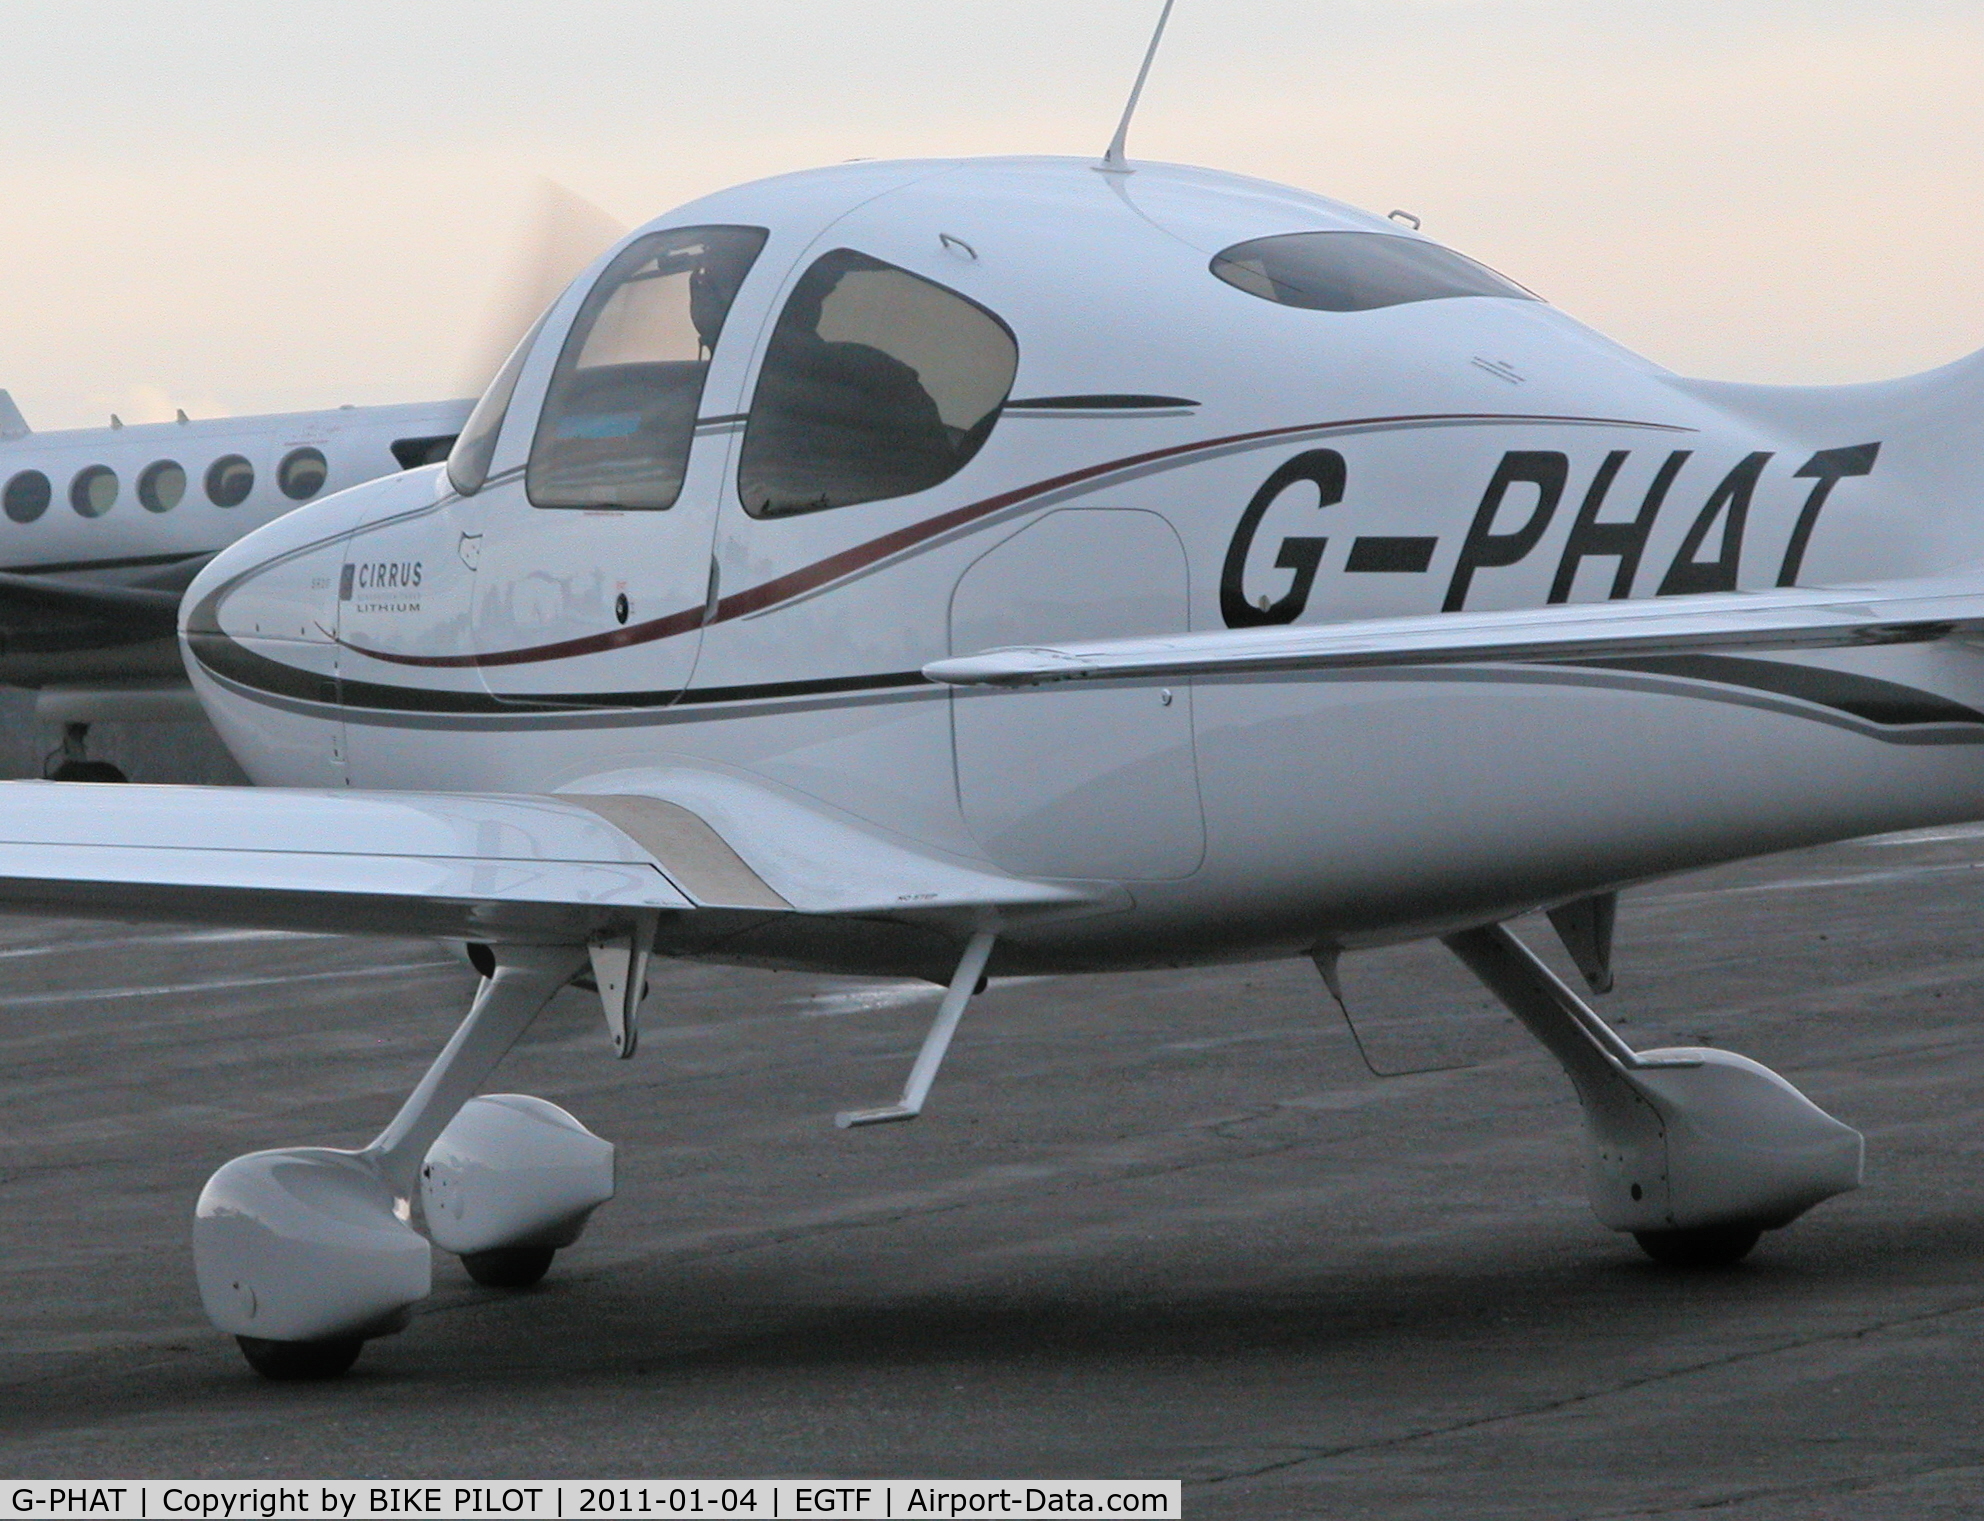 G-PHAT, 2008 Cirrus SR20 G3 C/N 1999, Taxying out to the rwy